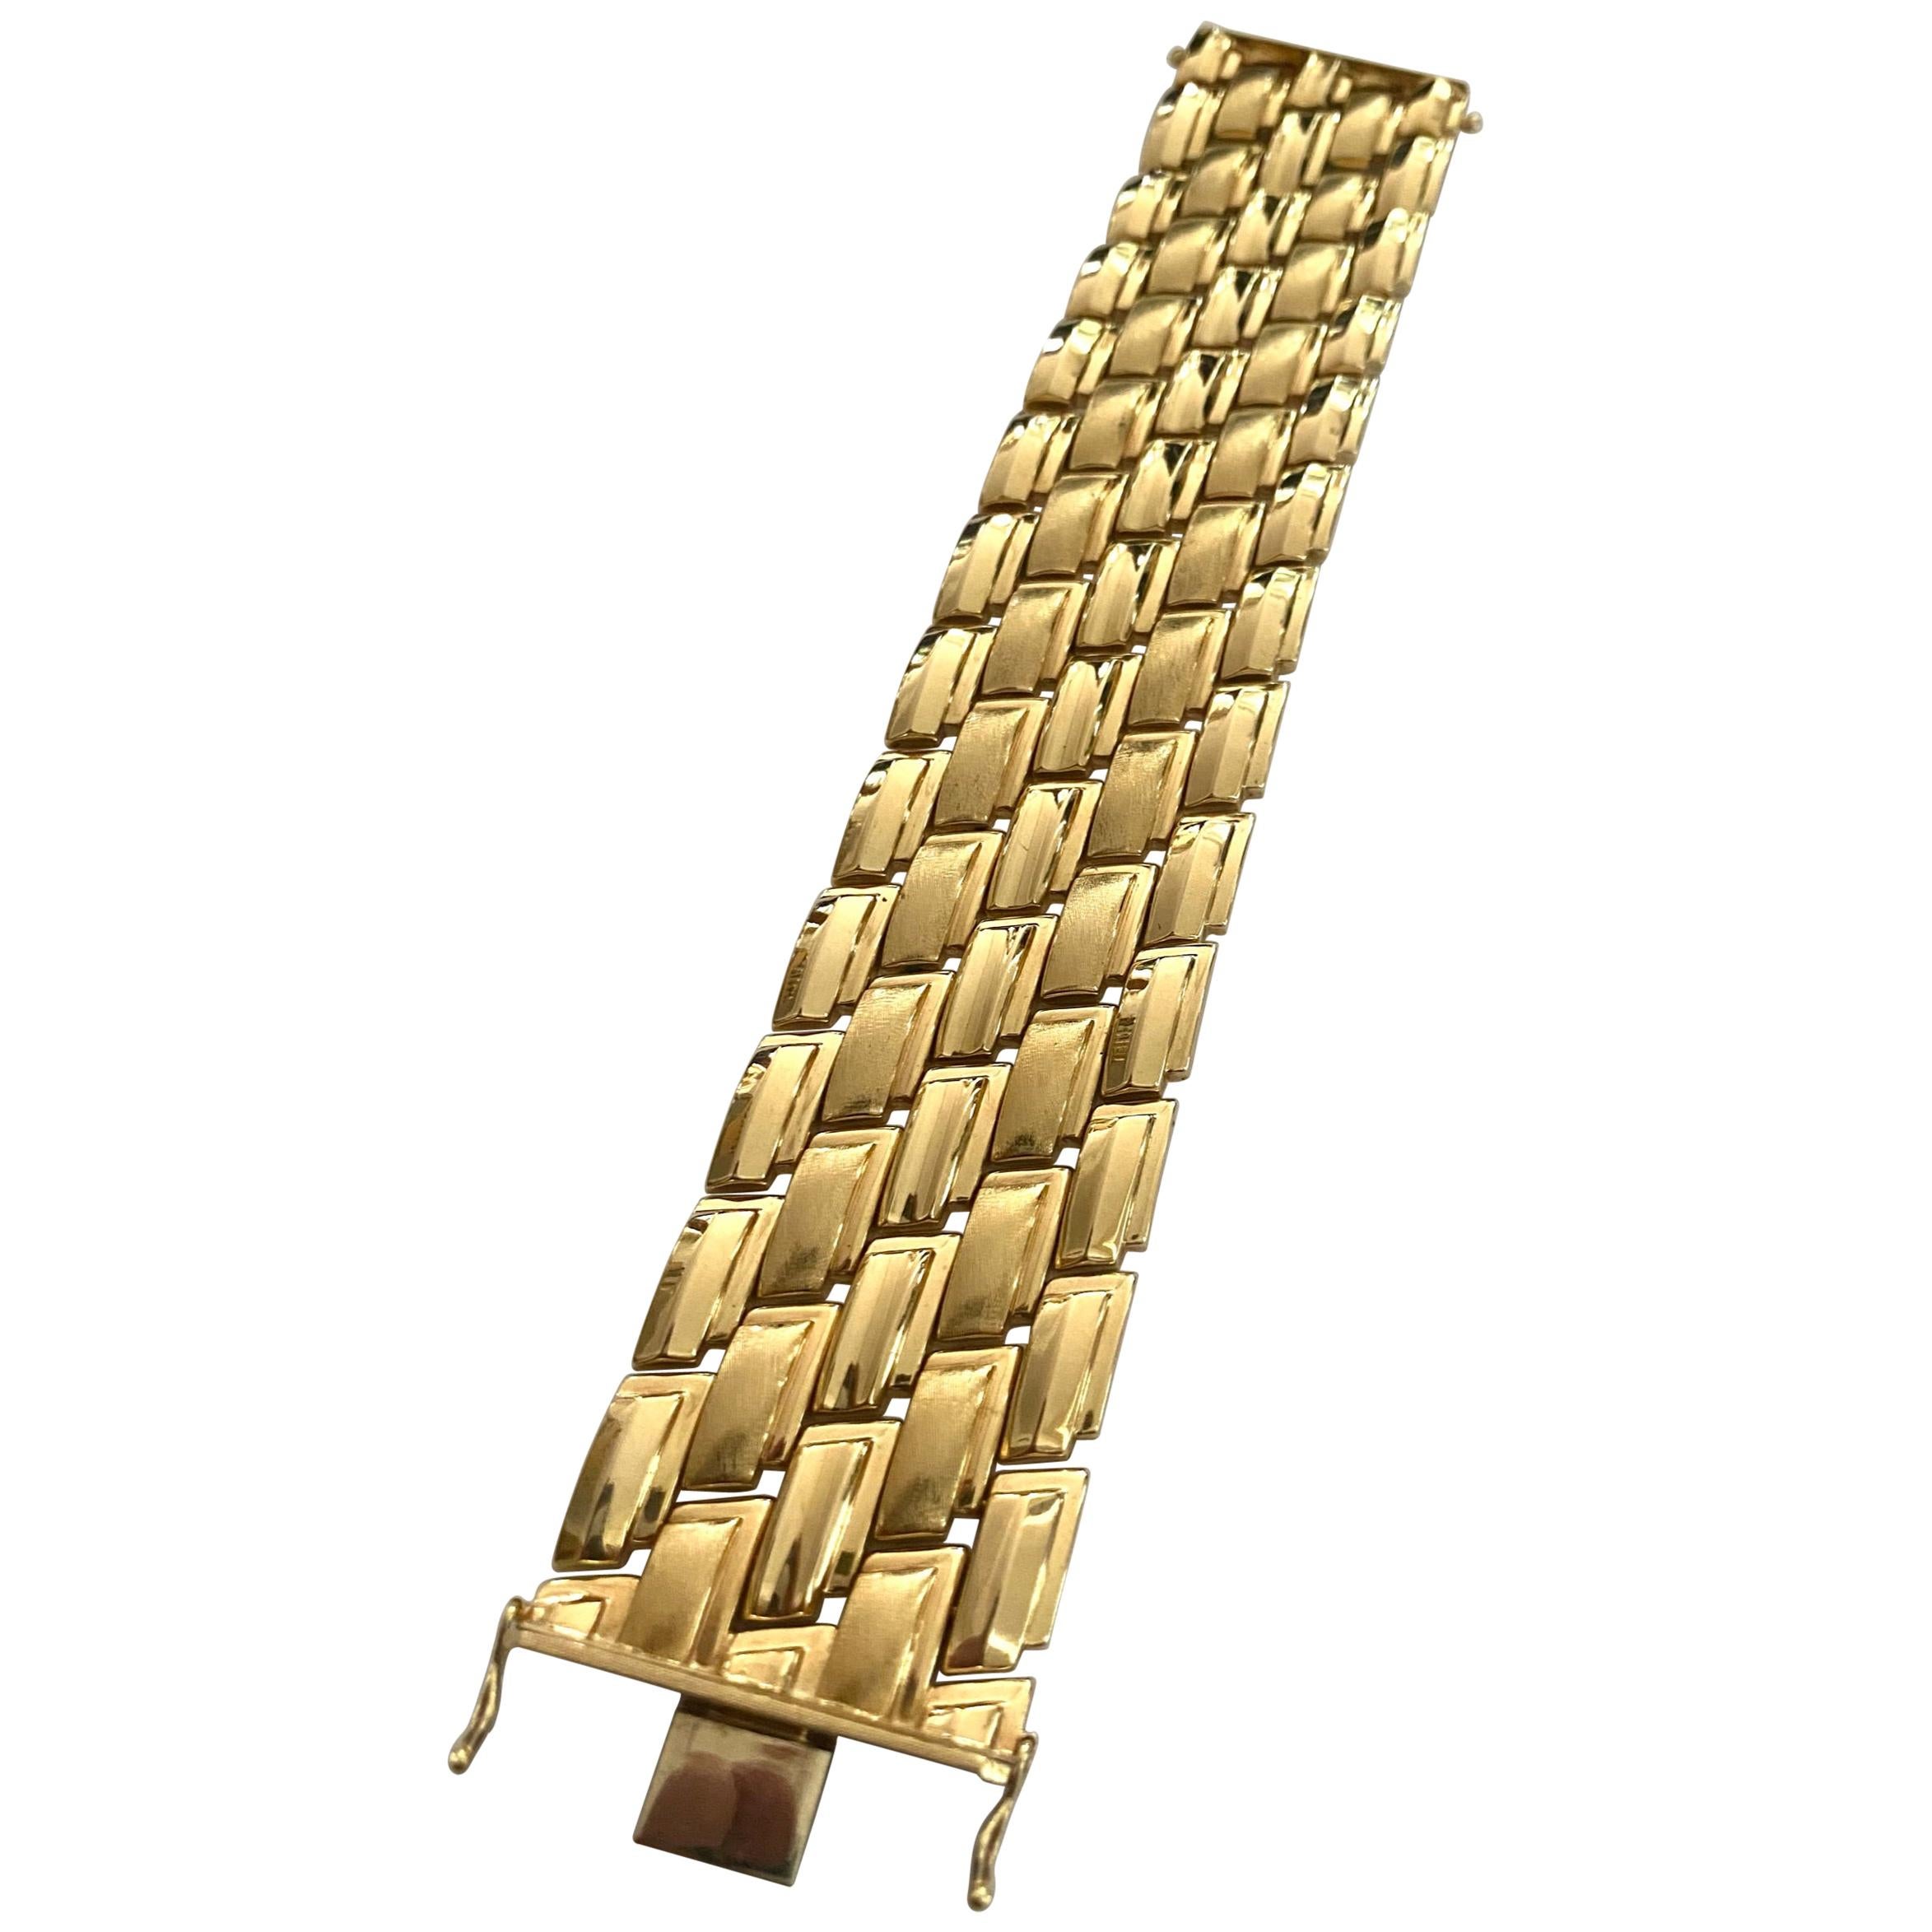 Vintage v bracelet in 14Kt gold with a herringbone pattern made in Italy,circa 1970